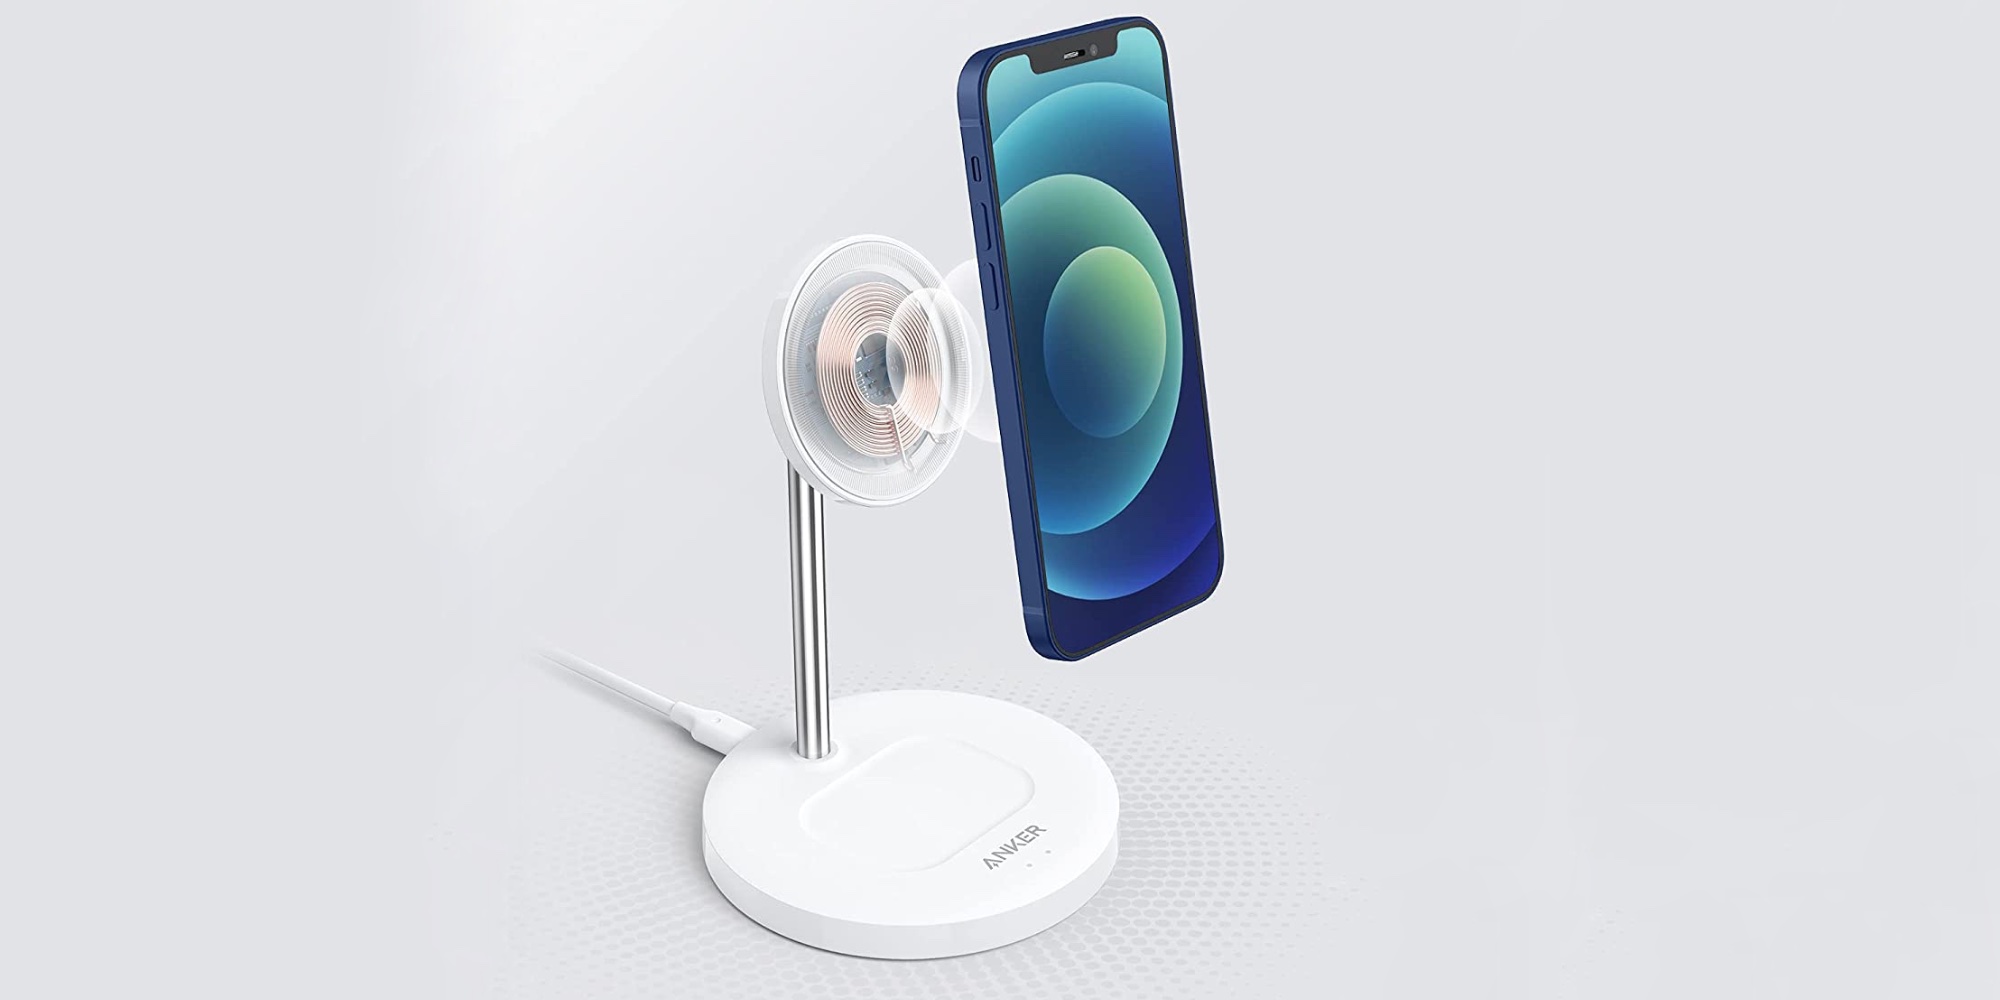 Anker 2xquick. Зарядник Anker для айфона. Anker Power Wave Magnetic Wireless 2-in-1 Charging Stand. 3 В 1 Foldable Portable MAGSAFE Wireless Charging Stand. Anker magsafe